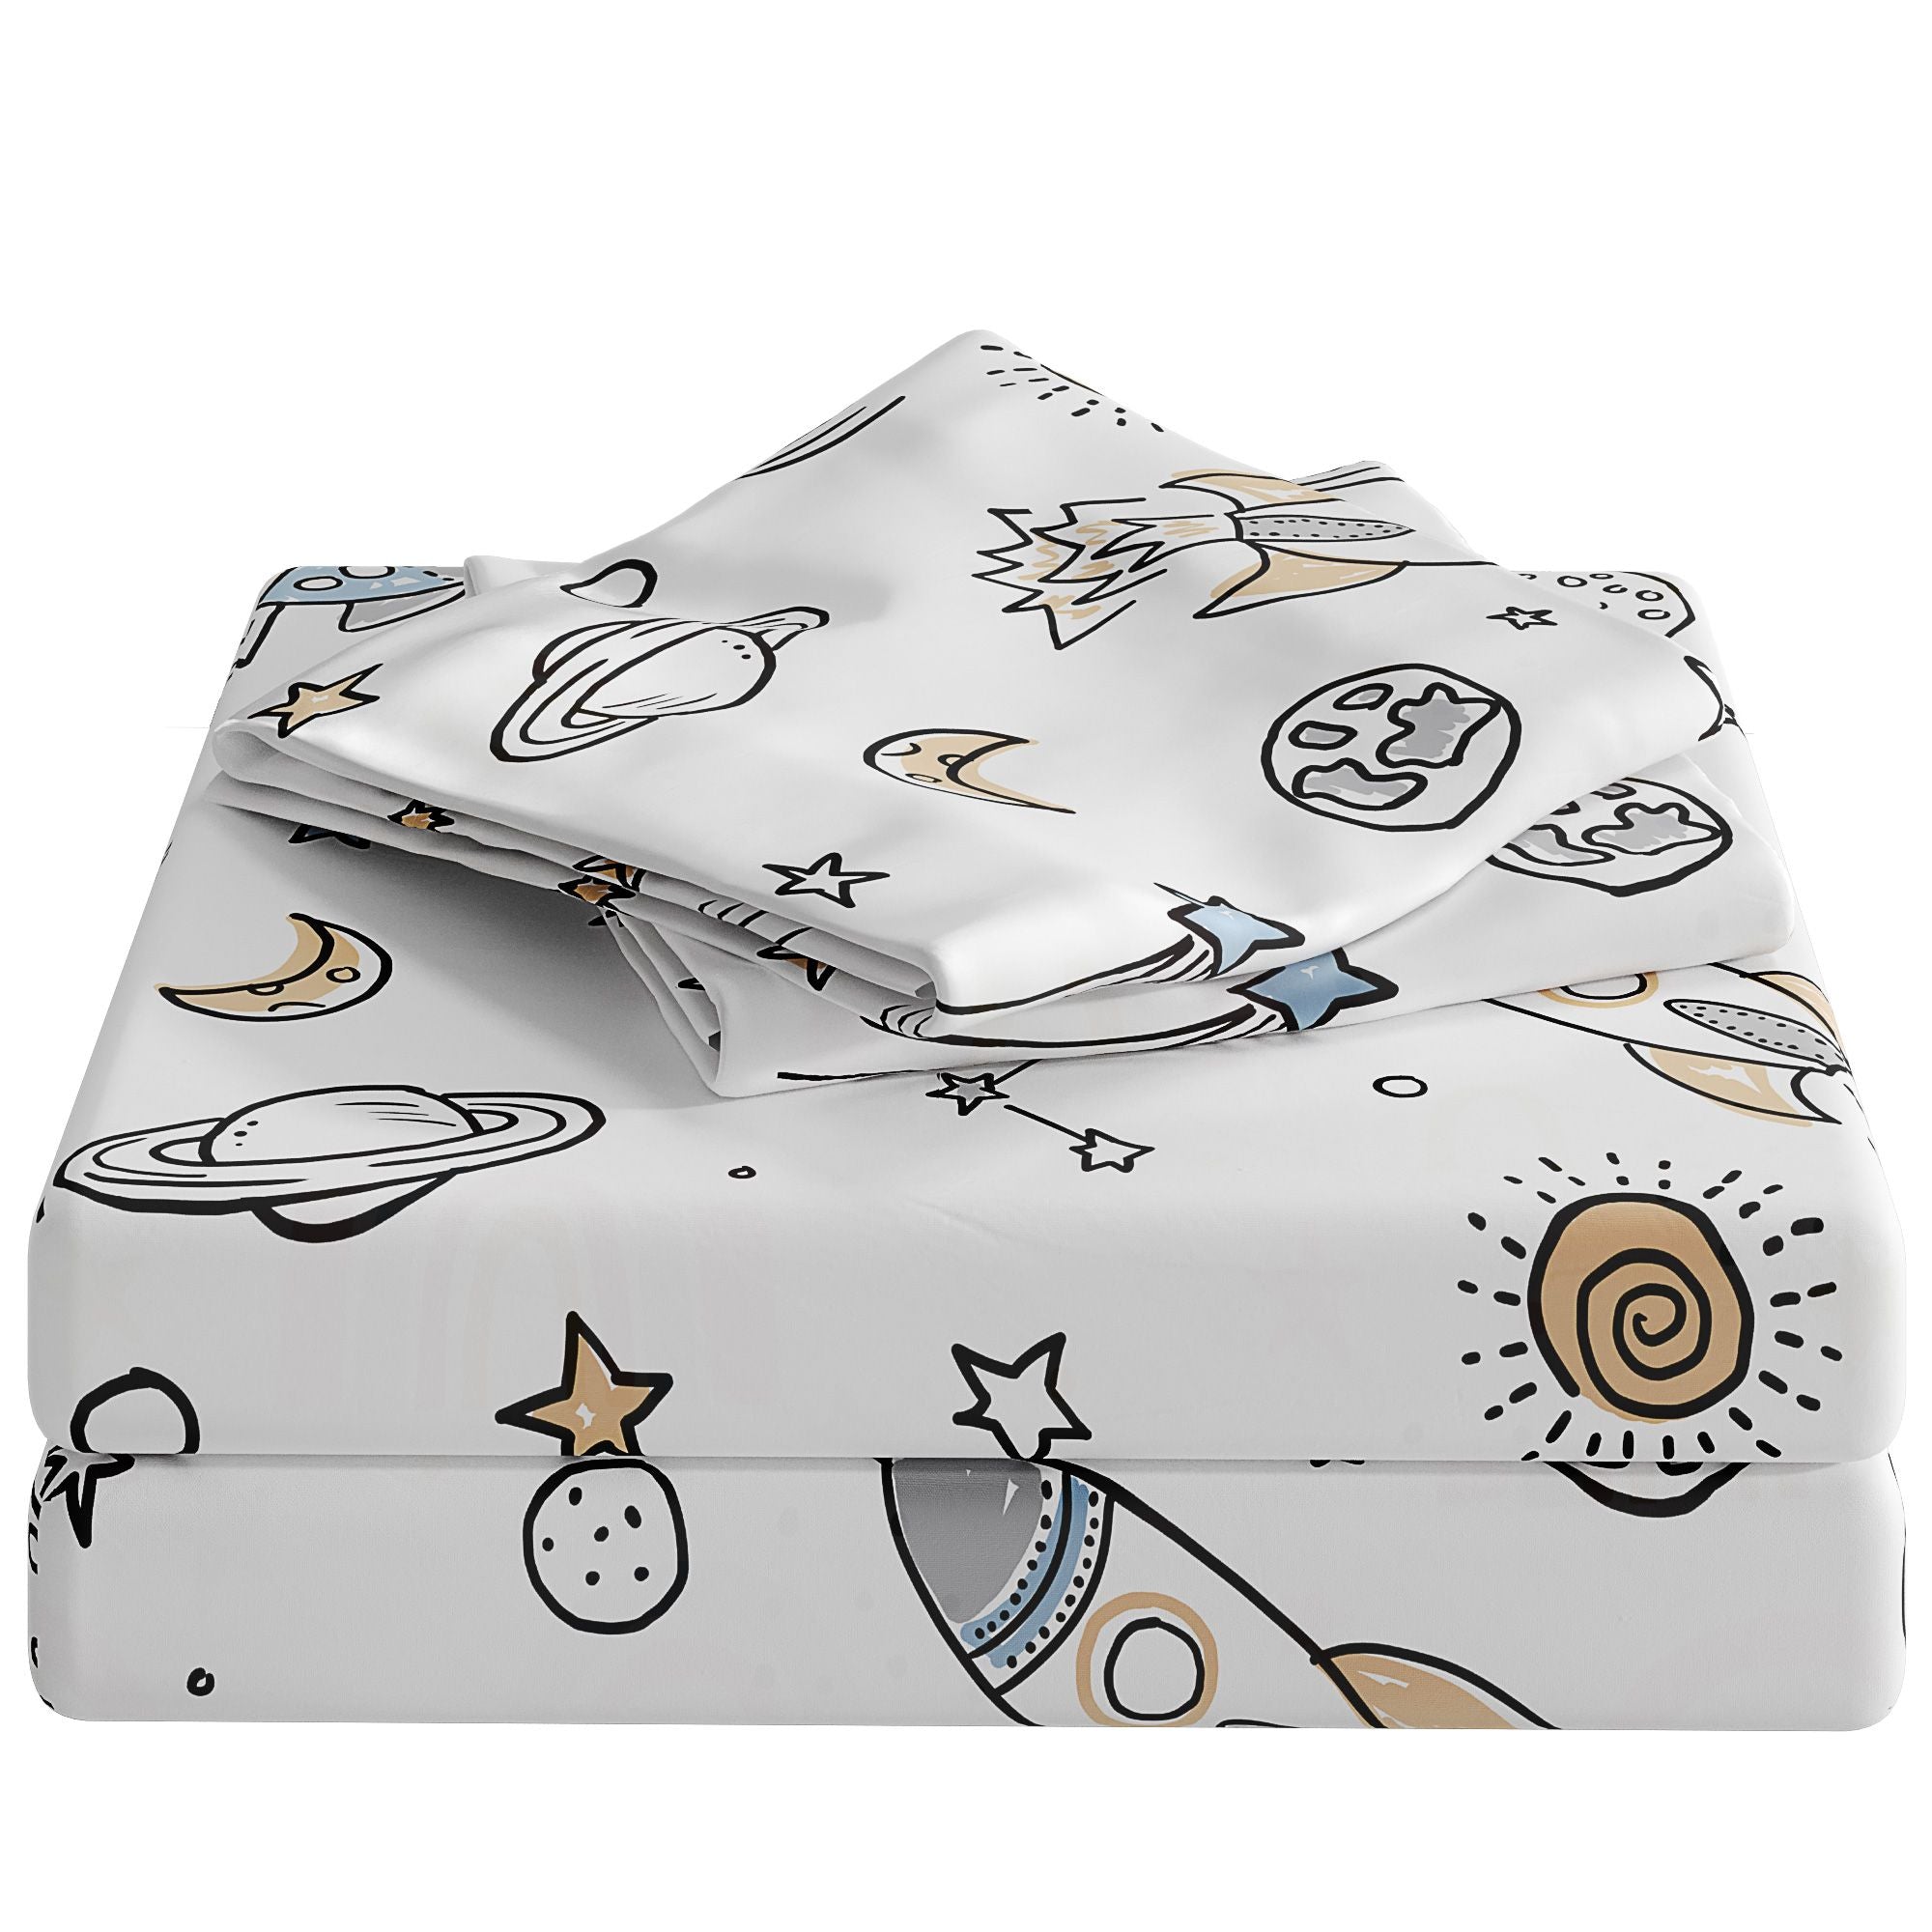 tes New Kids Sheet Set - Outer Space